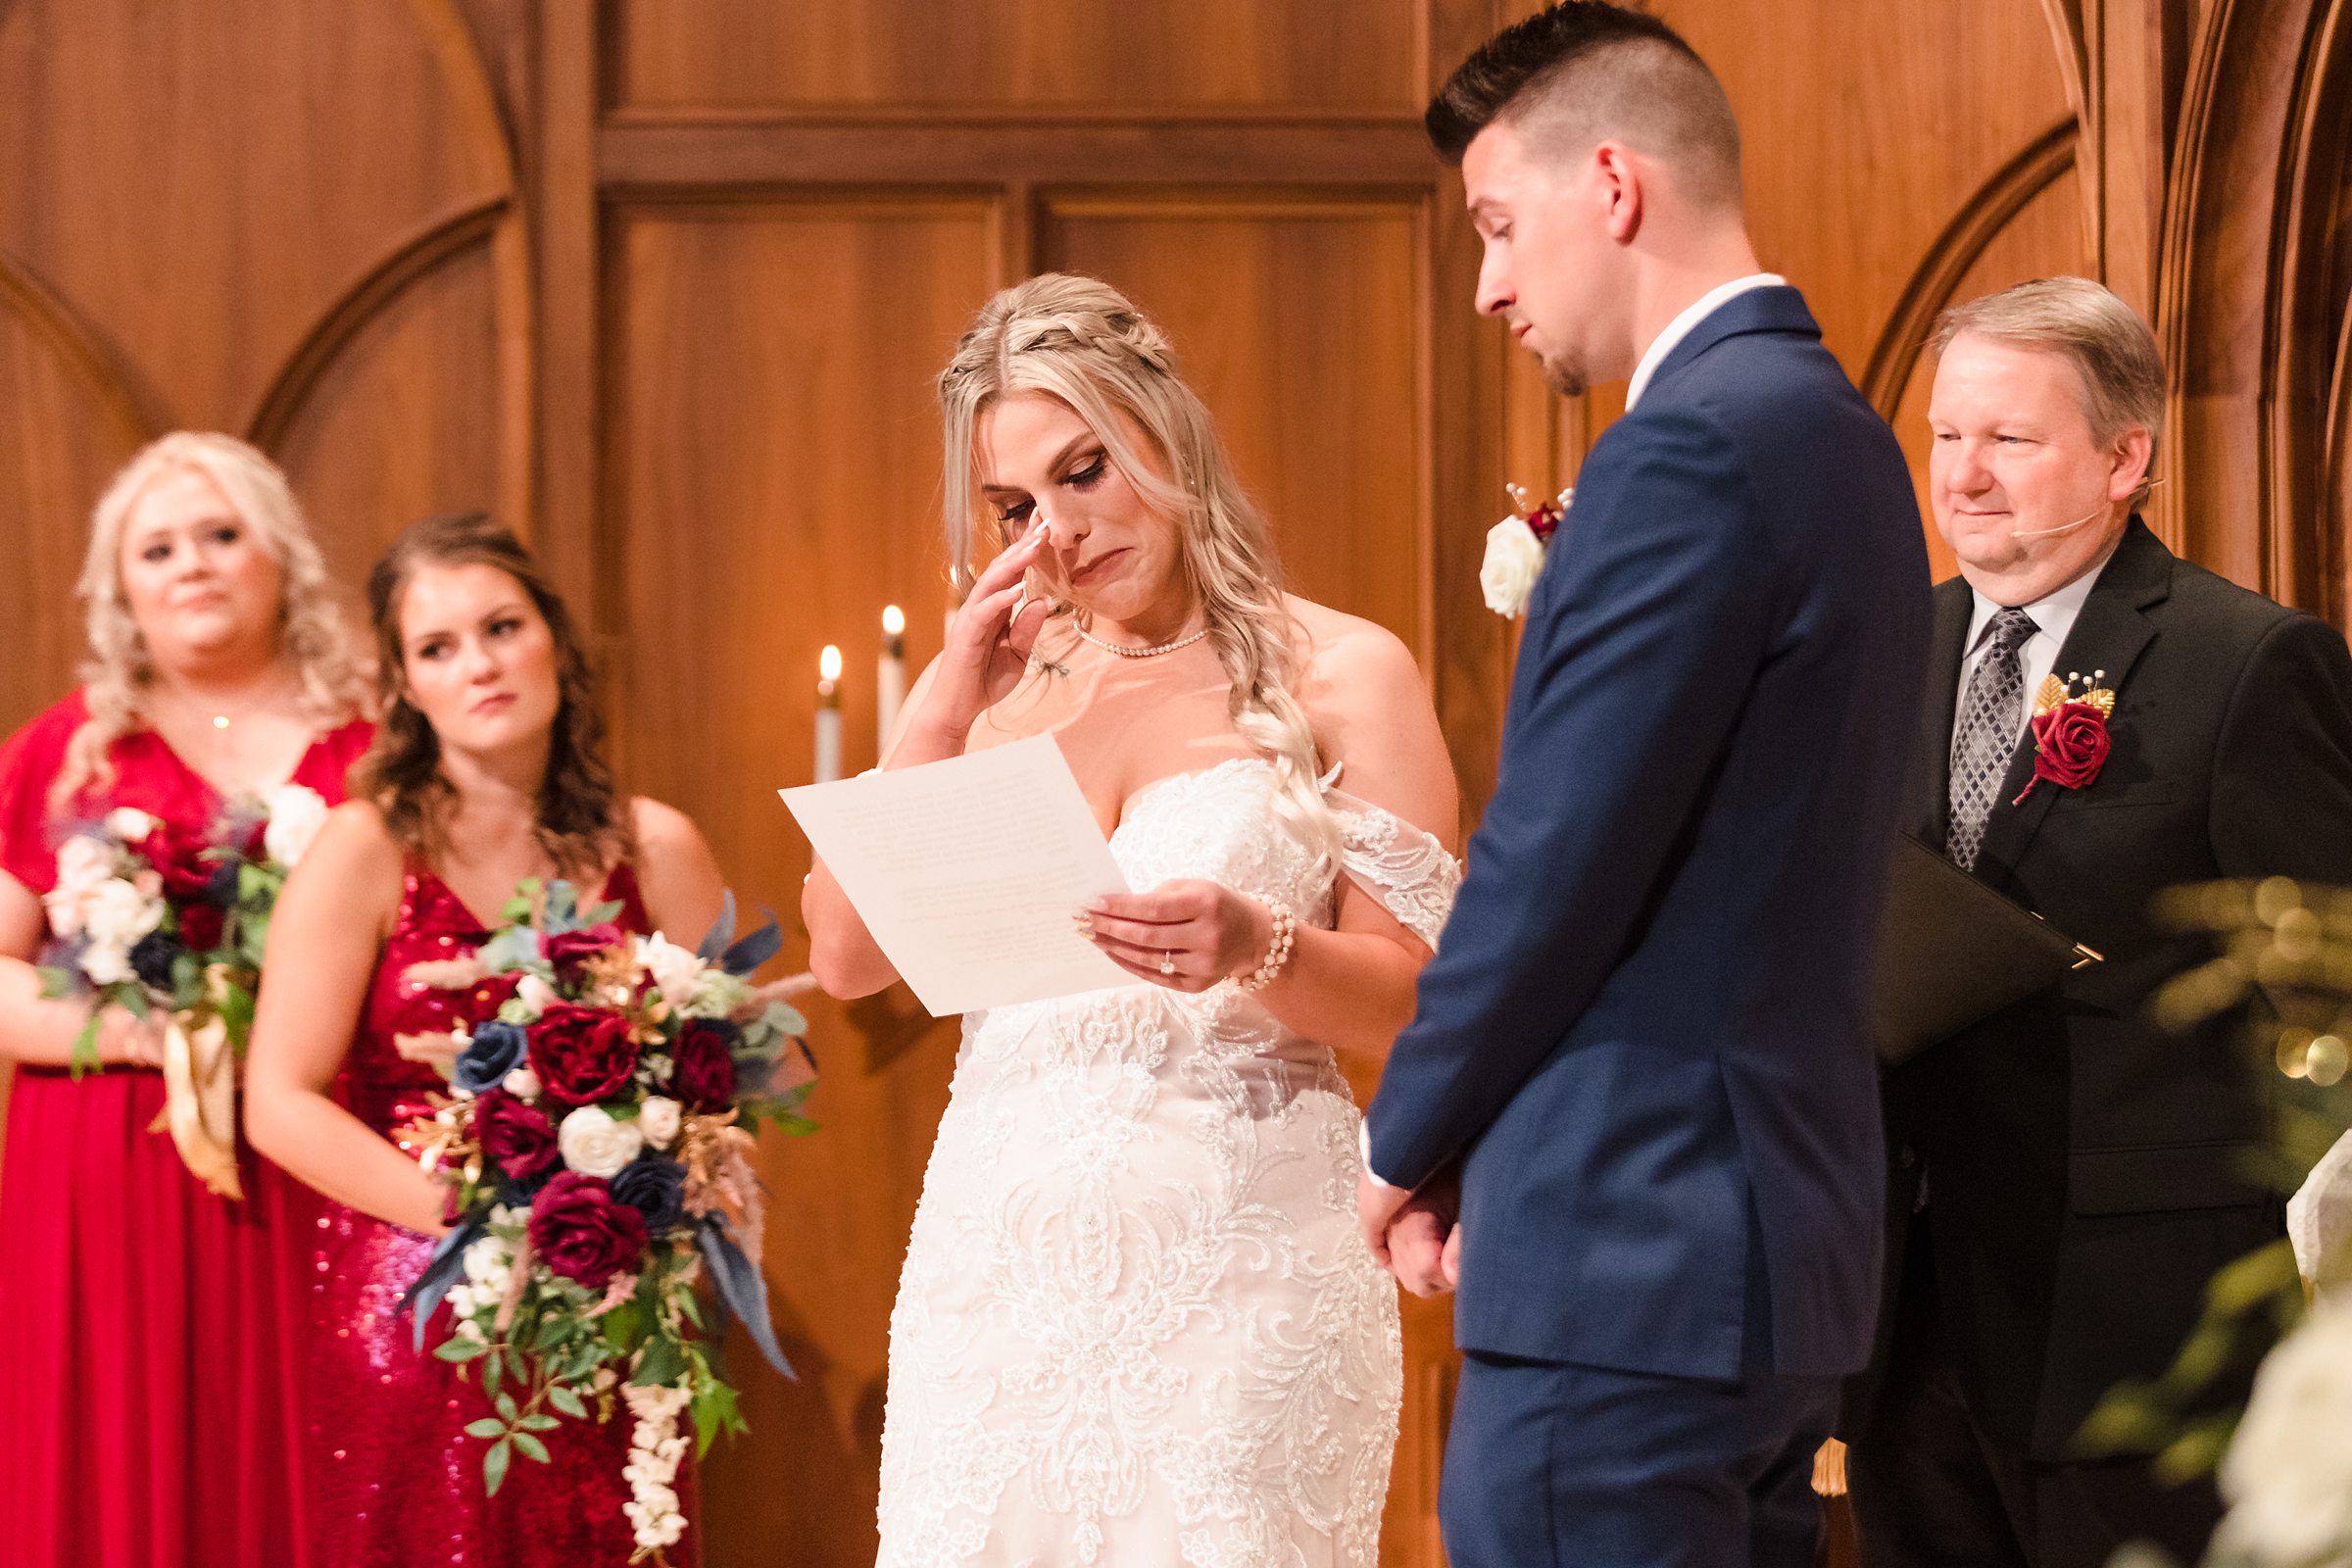 Bride gets emotional during her wedding at the First United Methodist Church in Peoria, Illinois